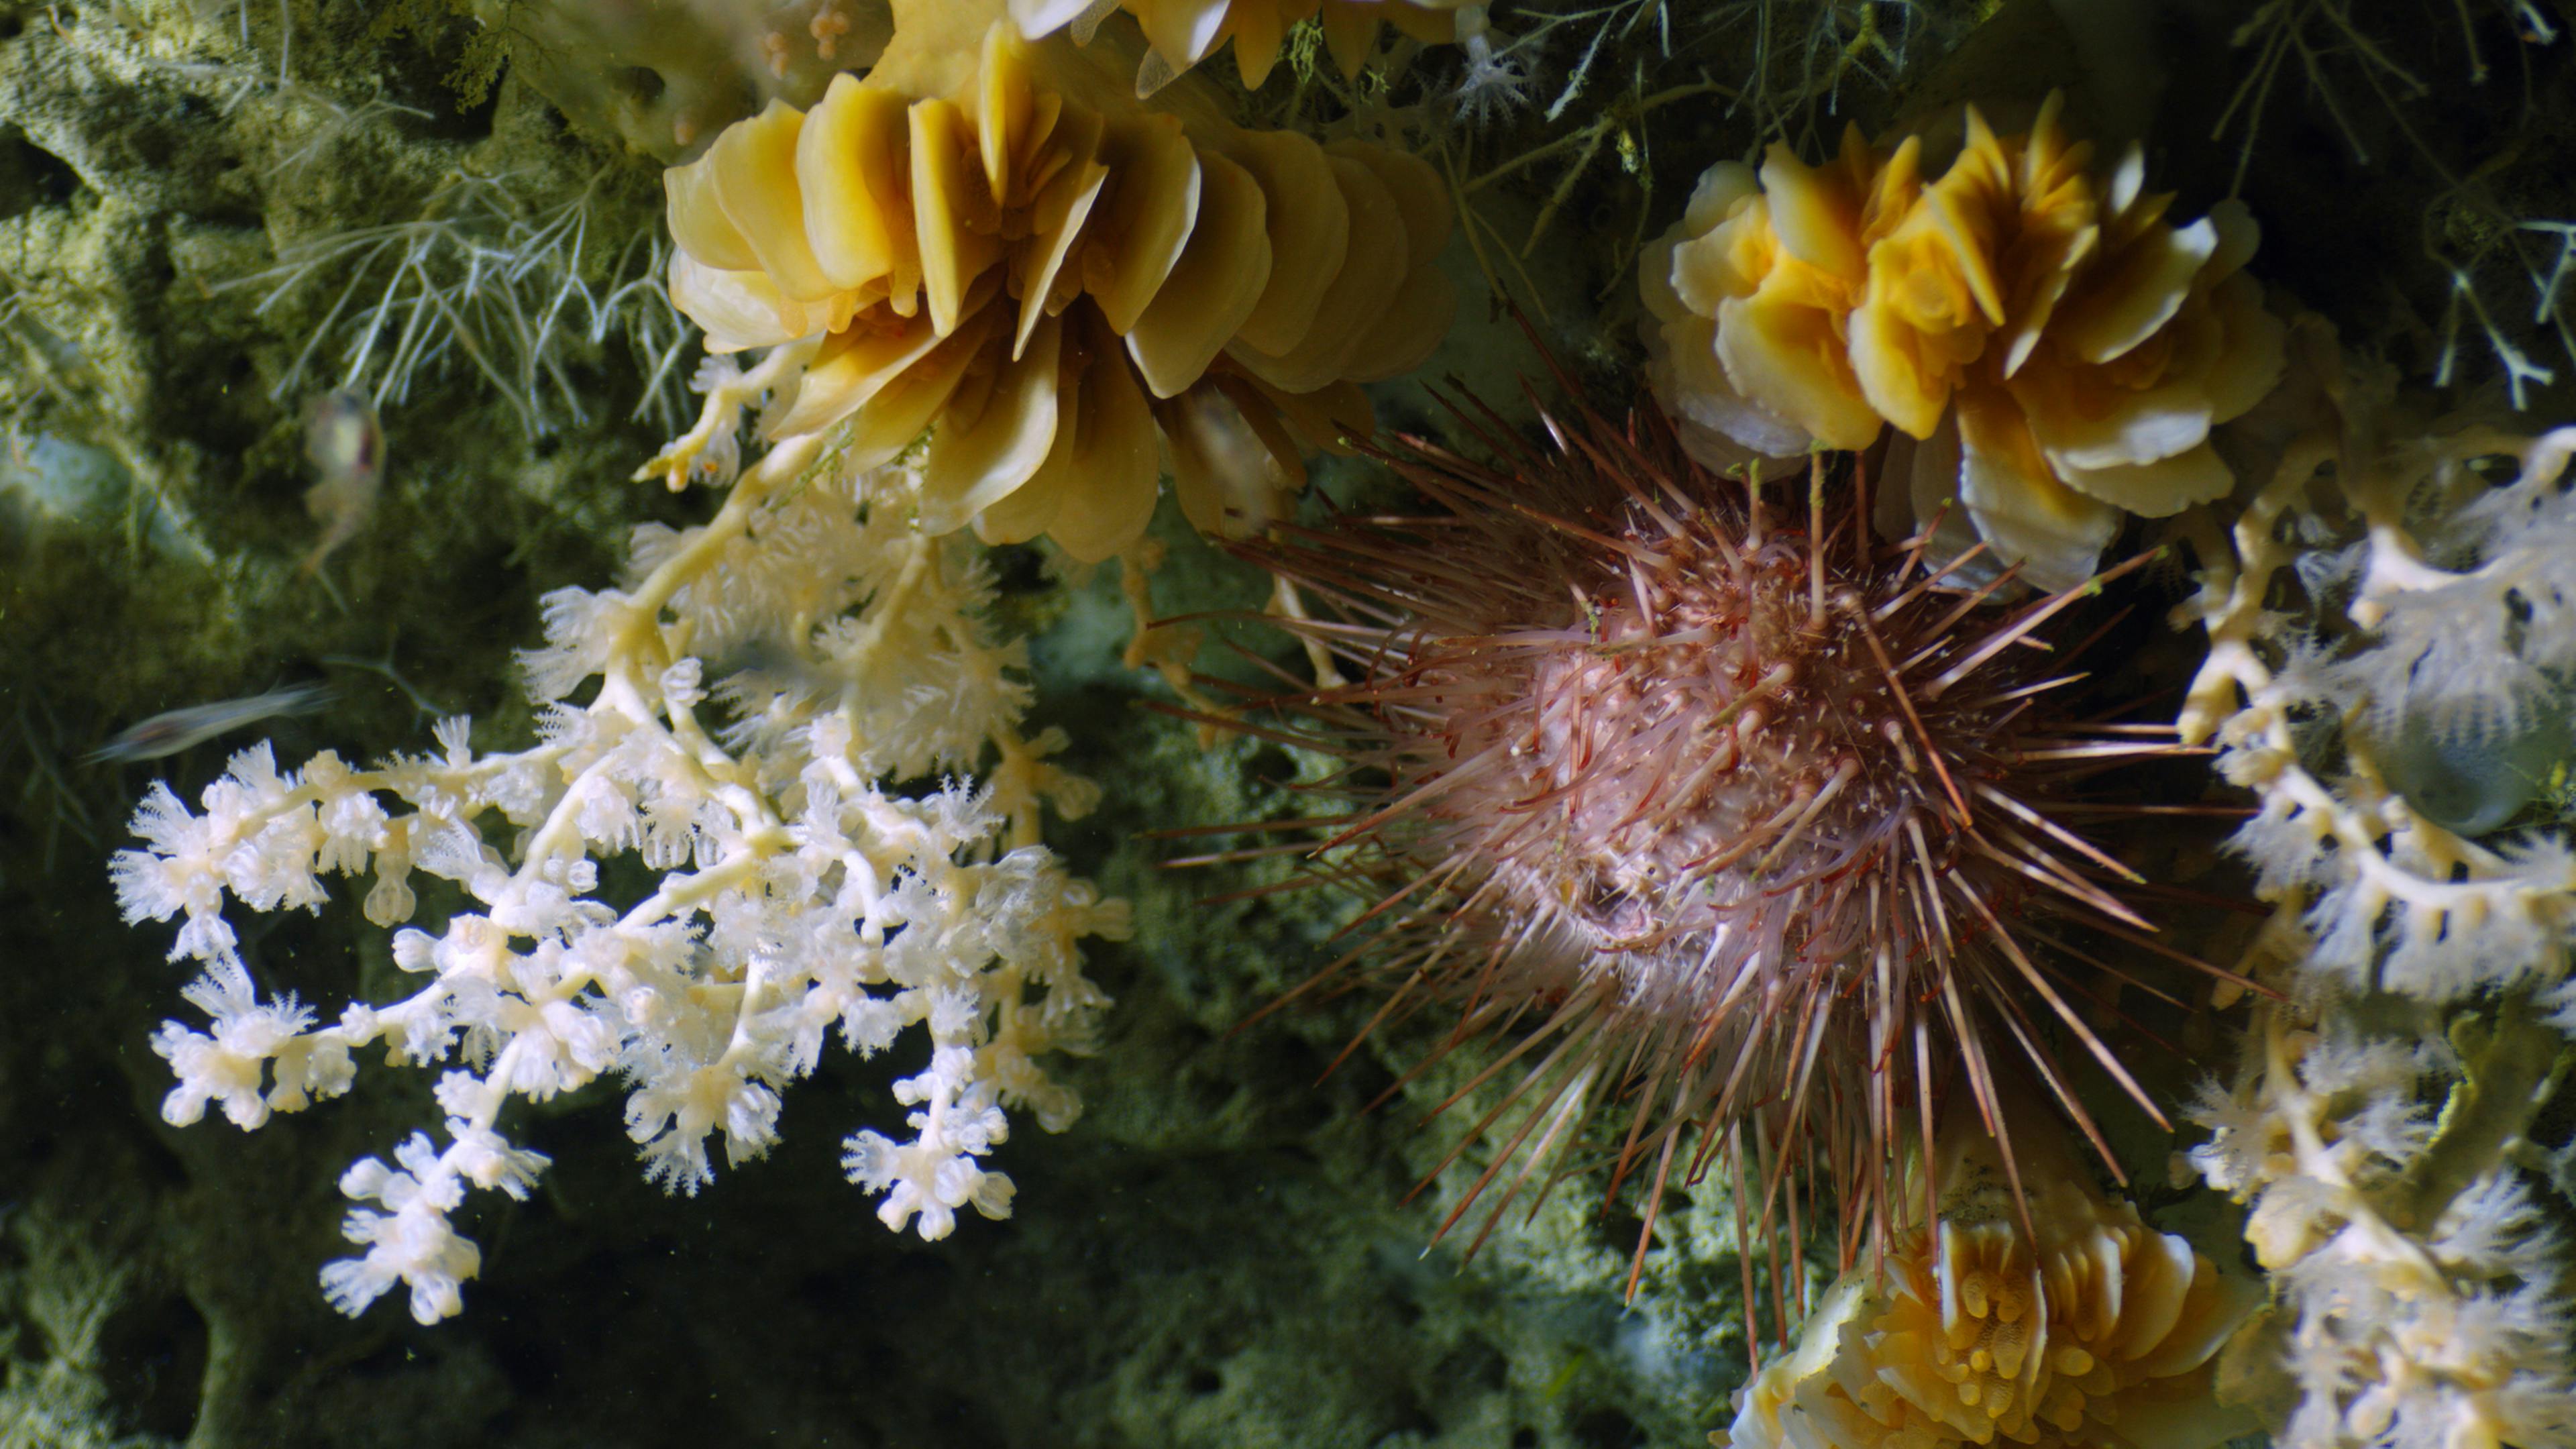 Northeast Canyons and Seamounts Marine National Monument and Antiquities Act Defense Initiative